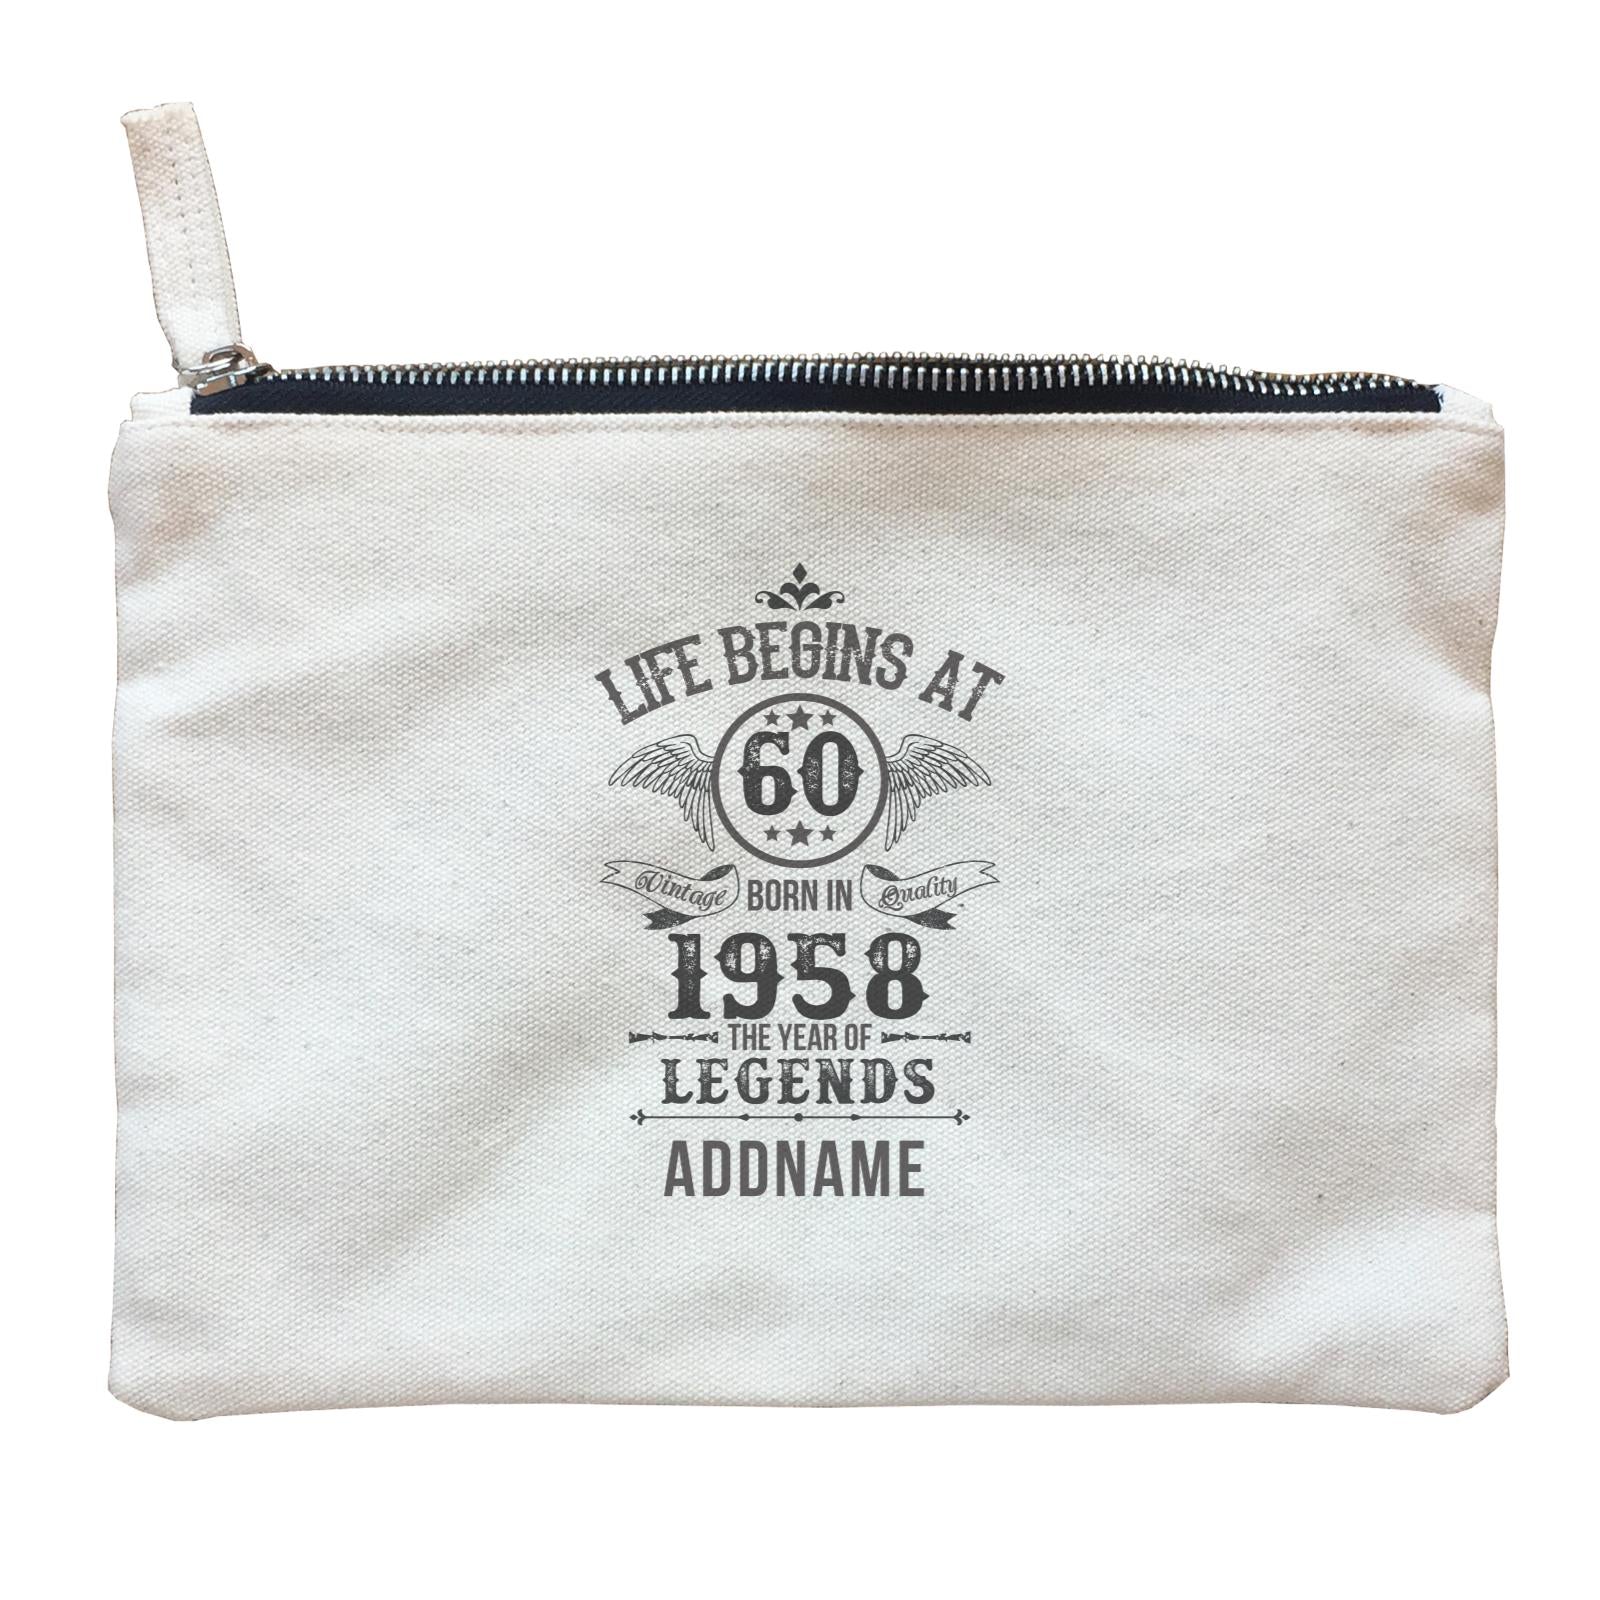 Personalize It Birthyear Life Begins At The Year Legends with Addname and Add Year Zipper Pouch